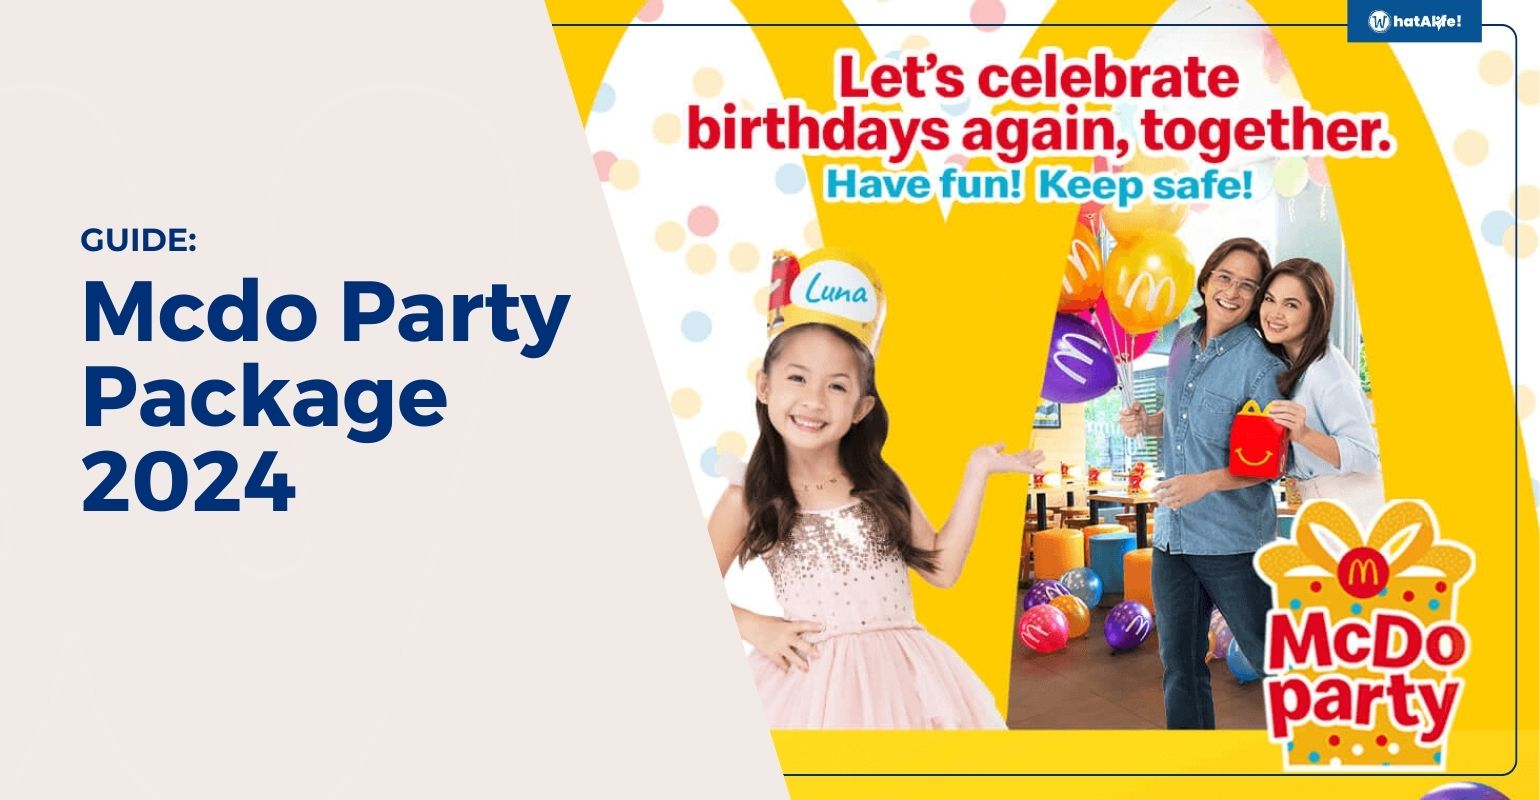 GUIDE: Mcdo Party Package 2024